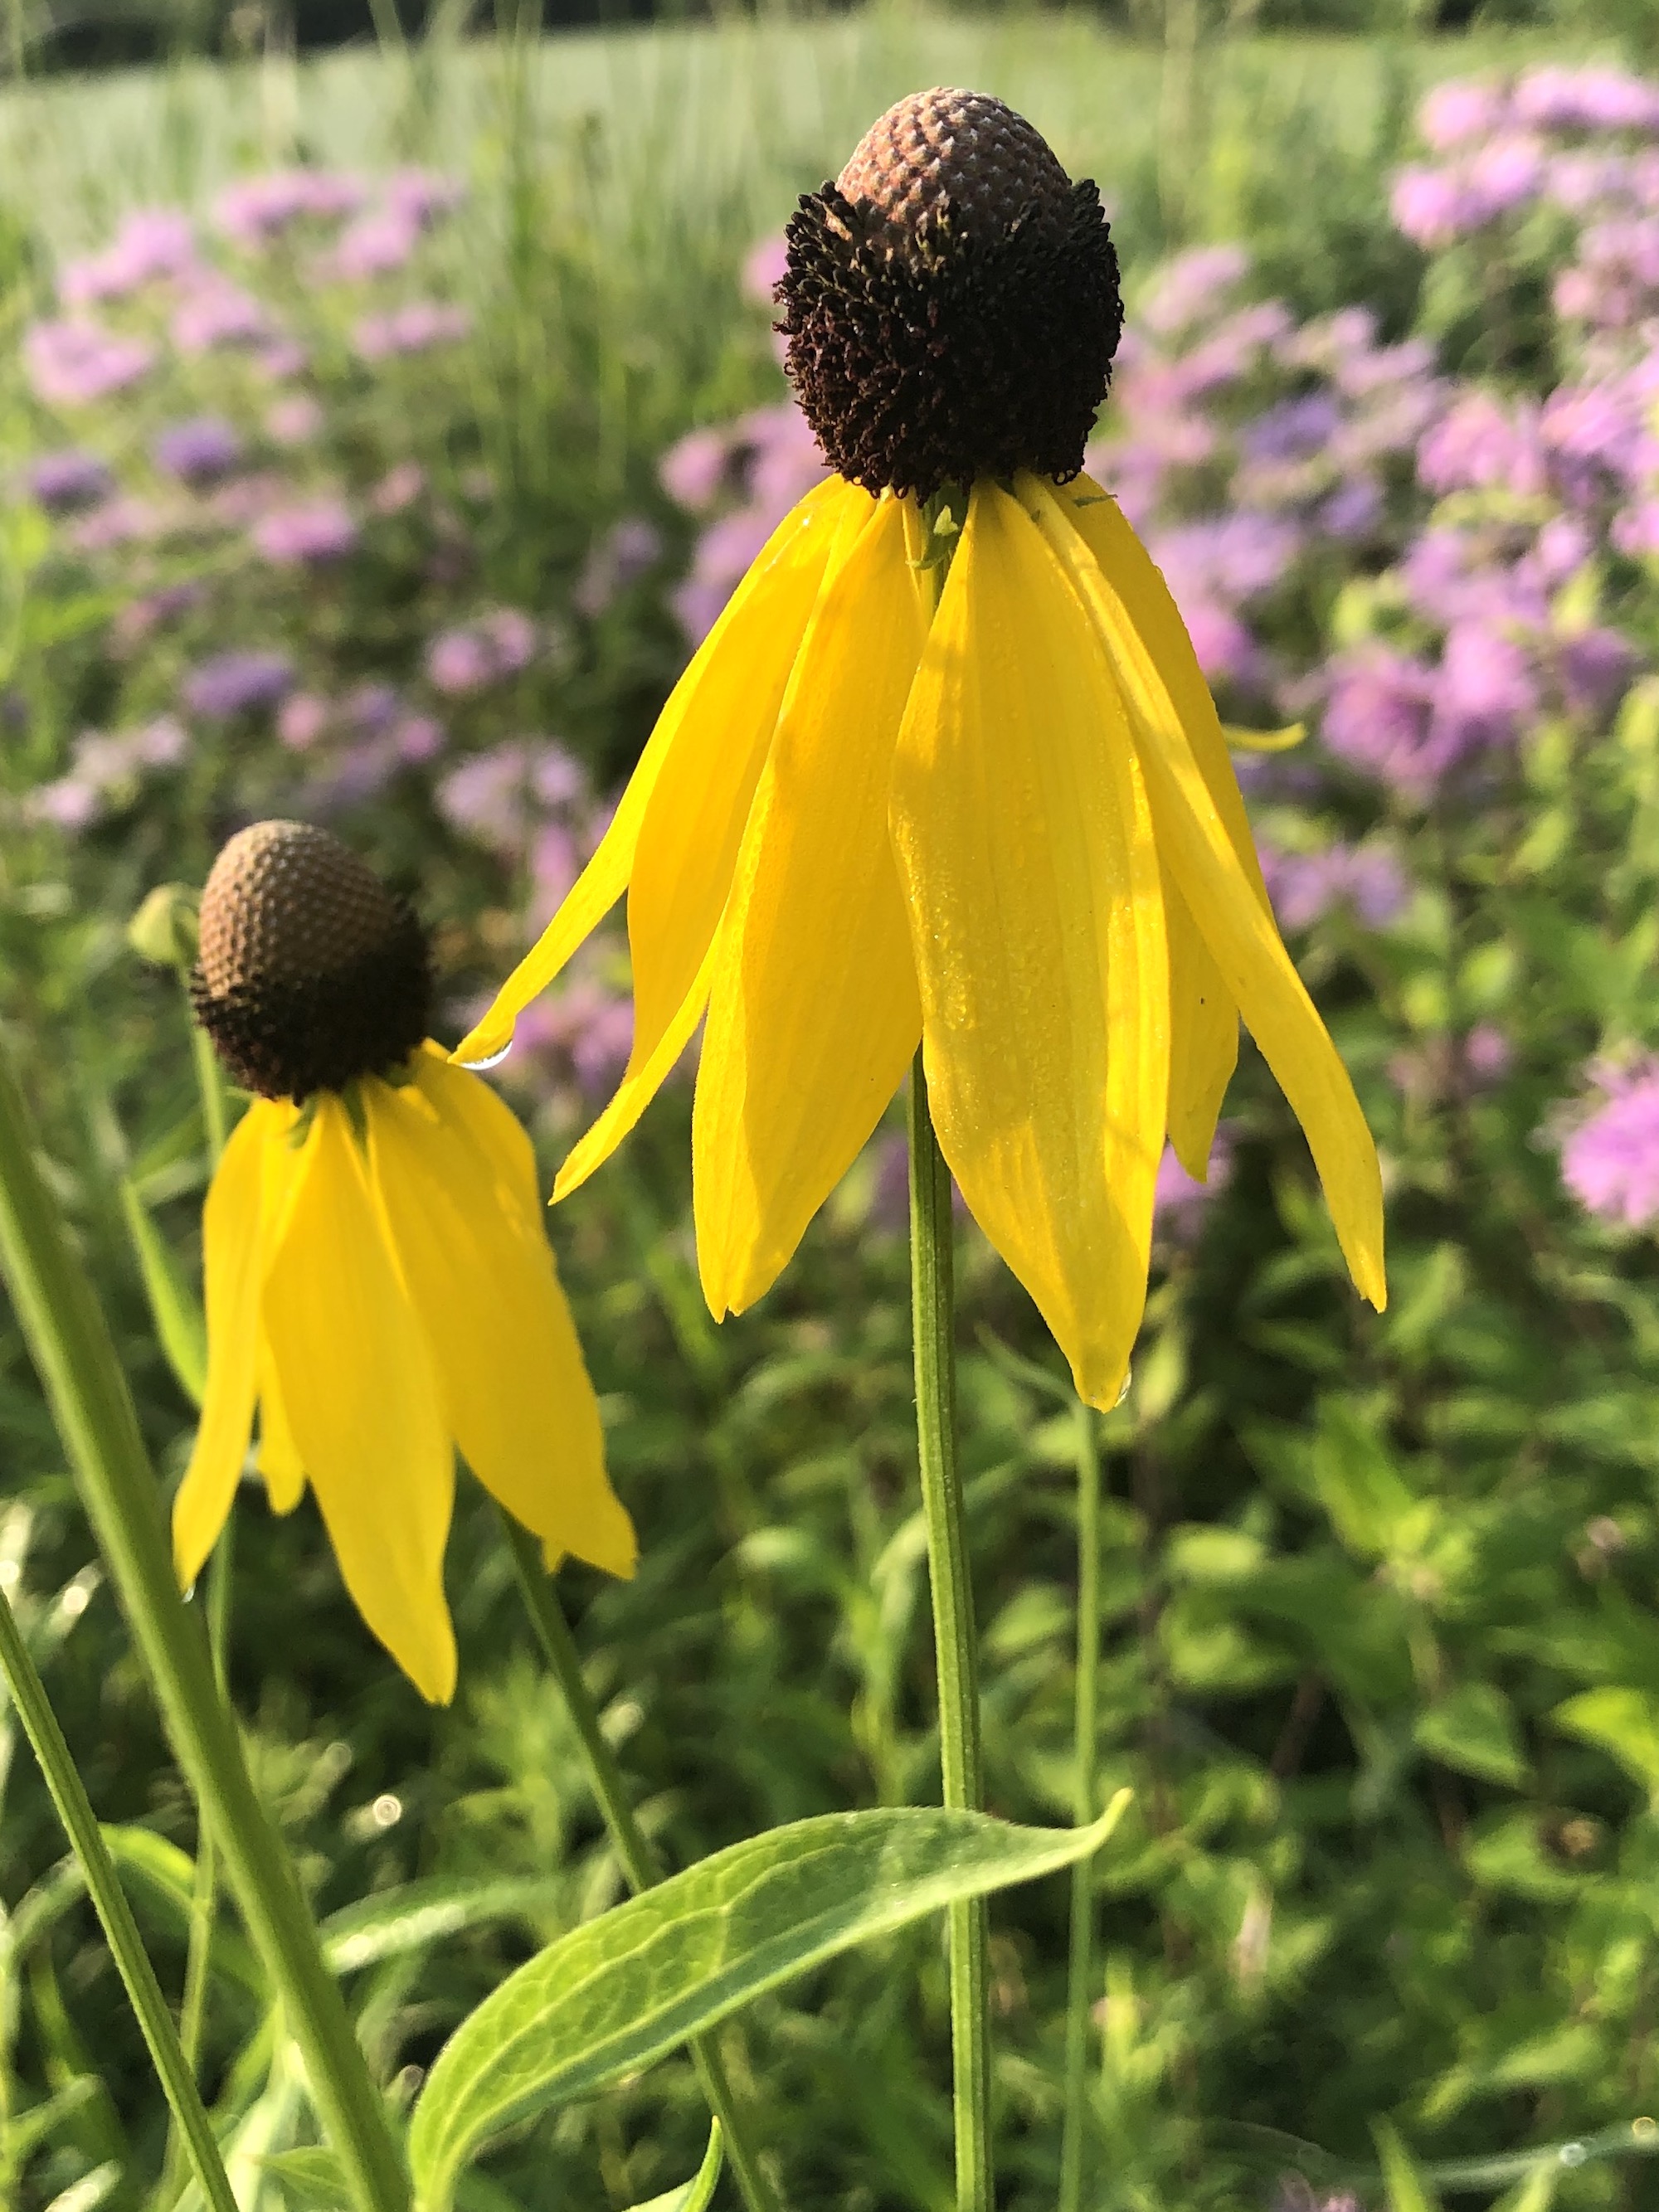 Gray-headed coneflower on shore of Marion Dunn Pond in Madison, Wisconsin on  July 16, 2021.